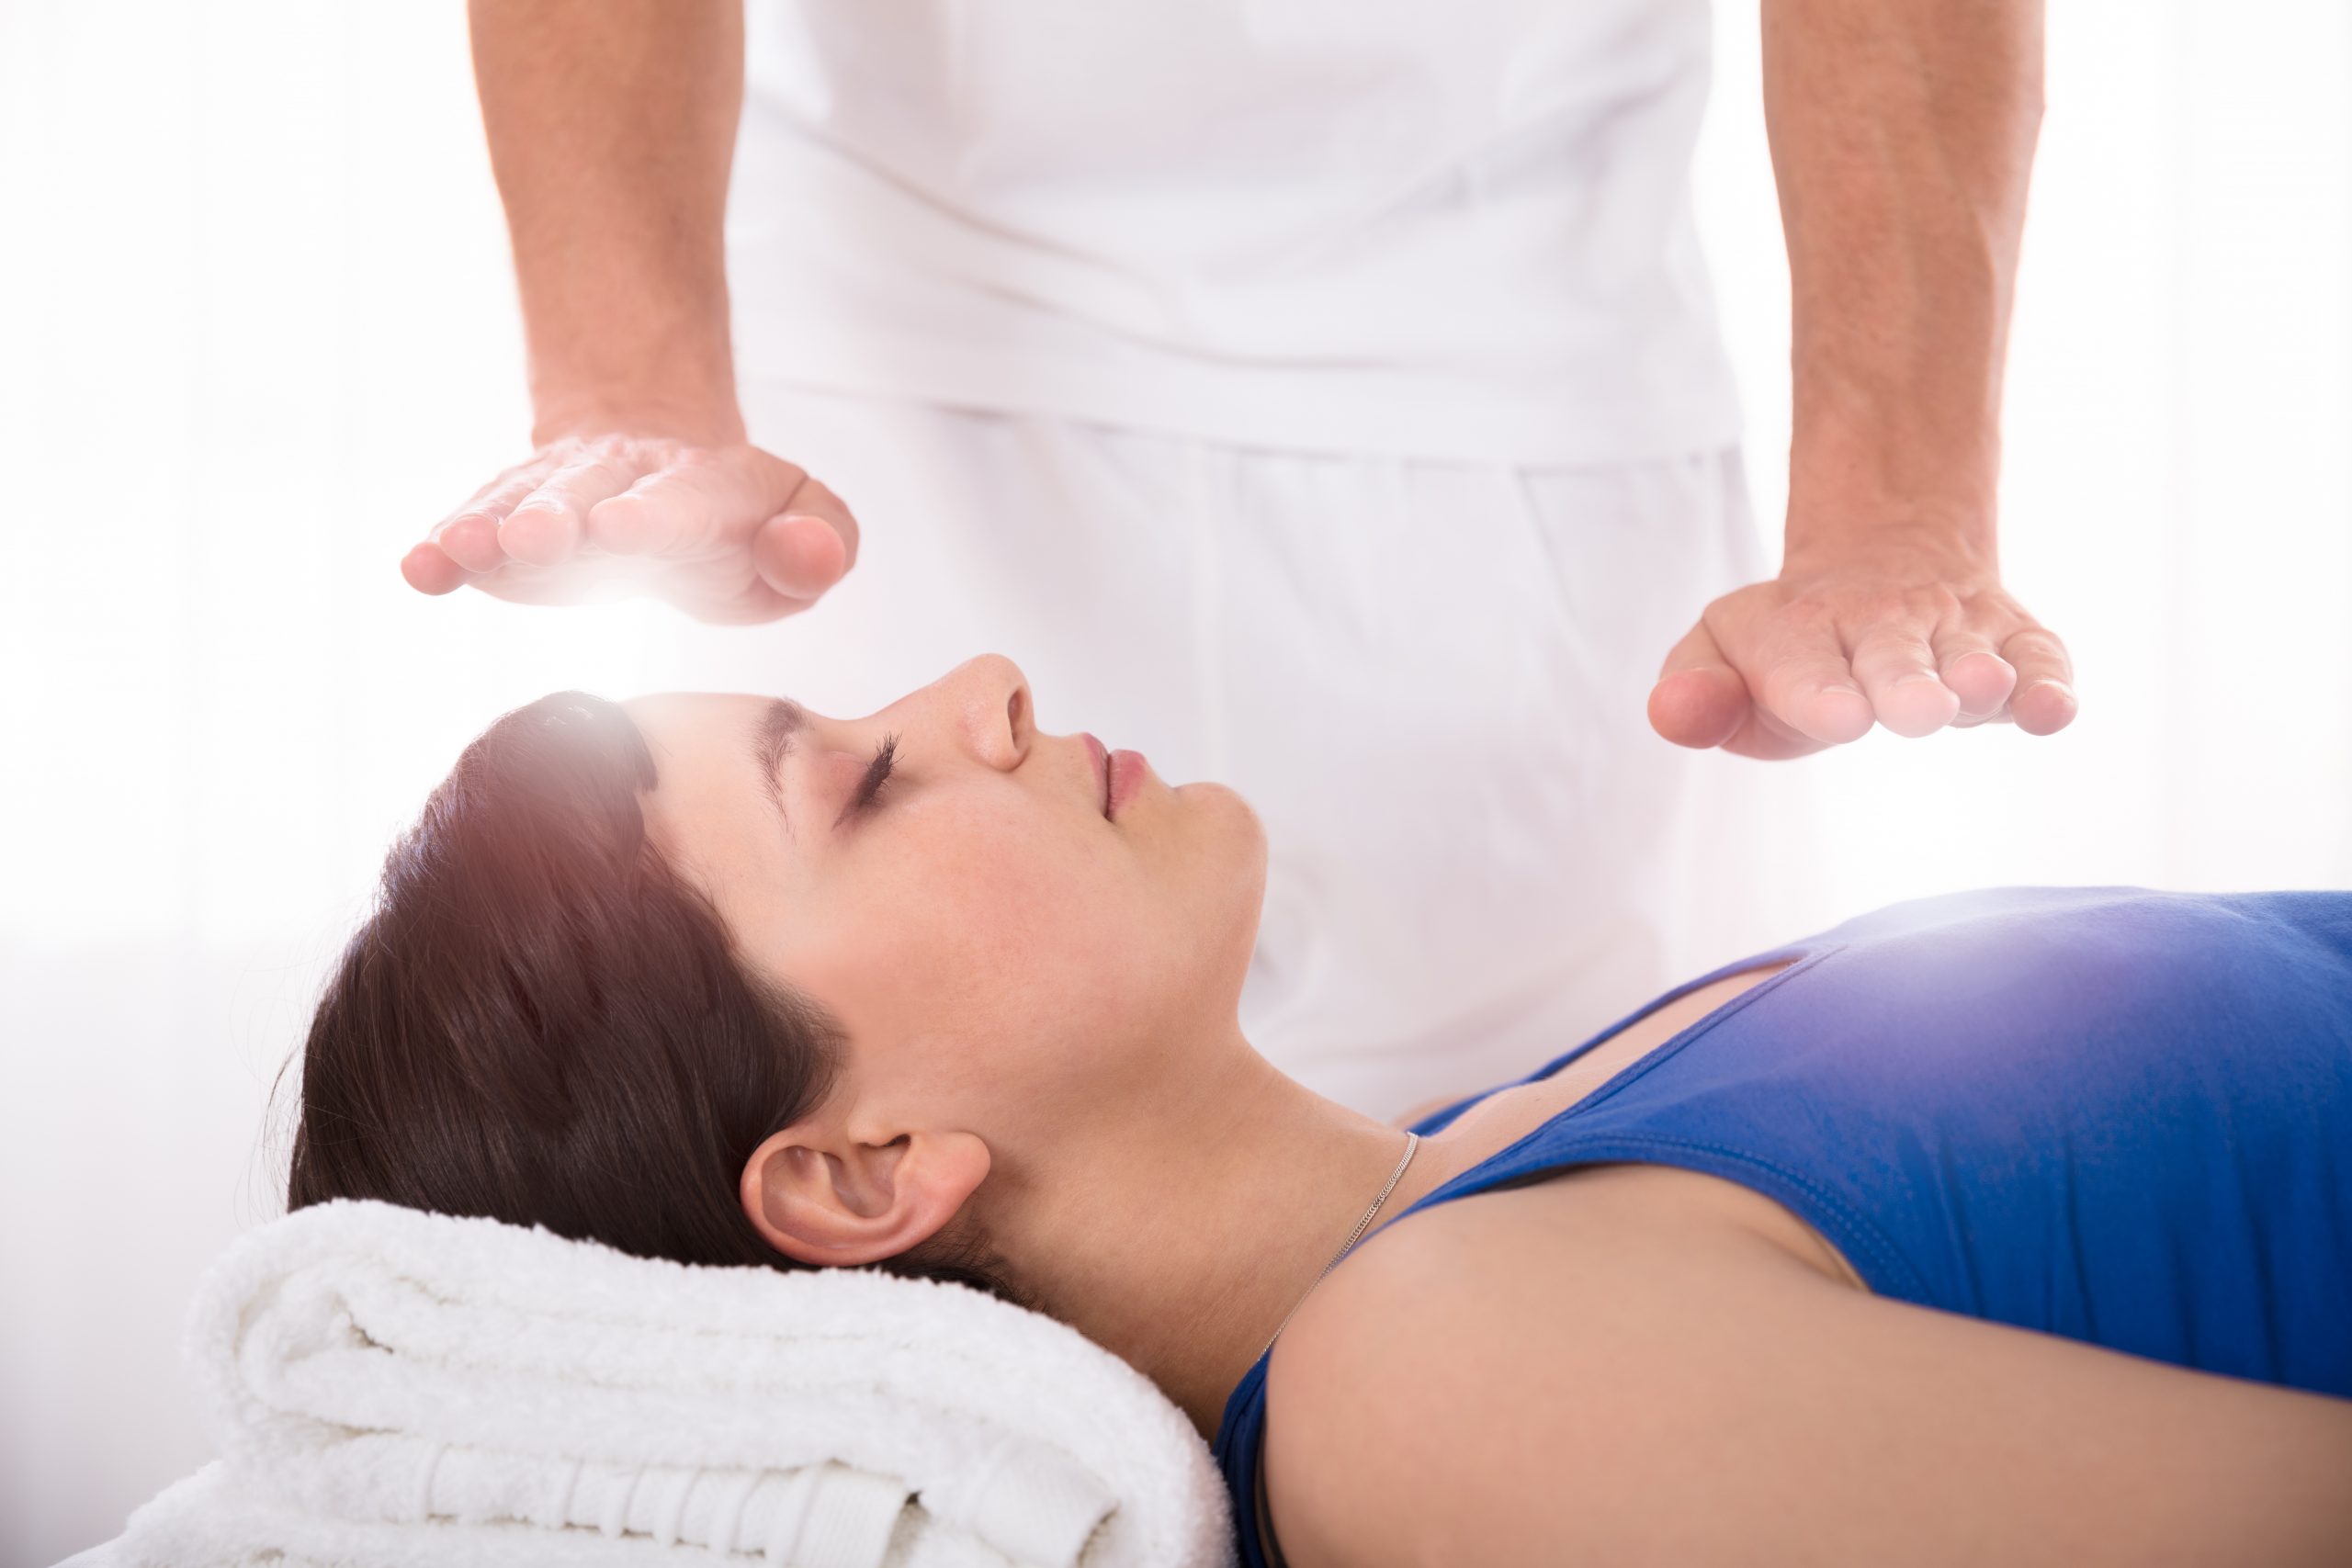 woman lying down receiving reiki energy healing through the hands of a practitioner